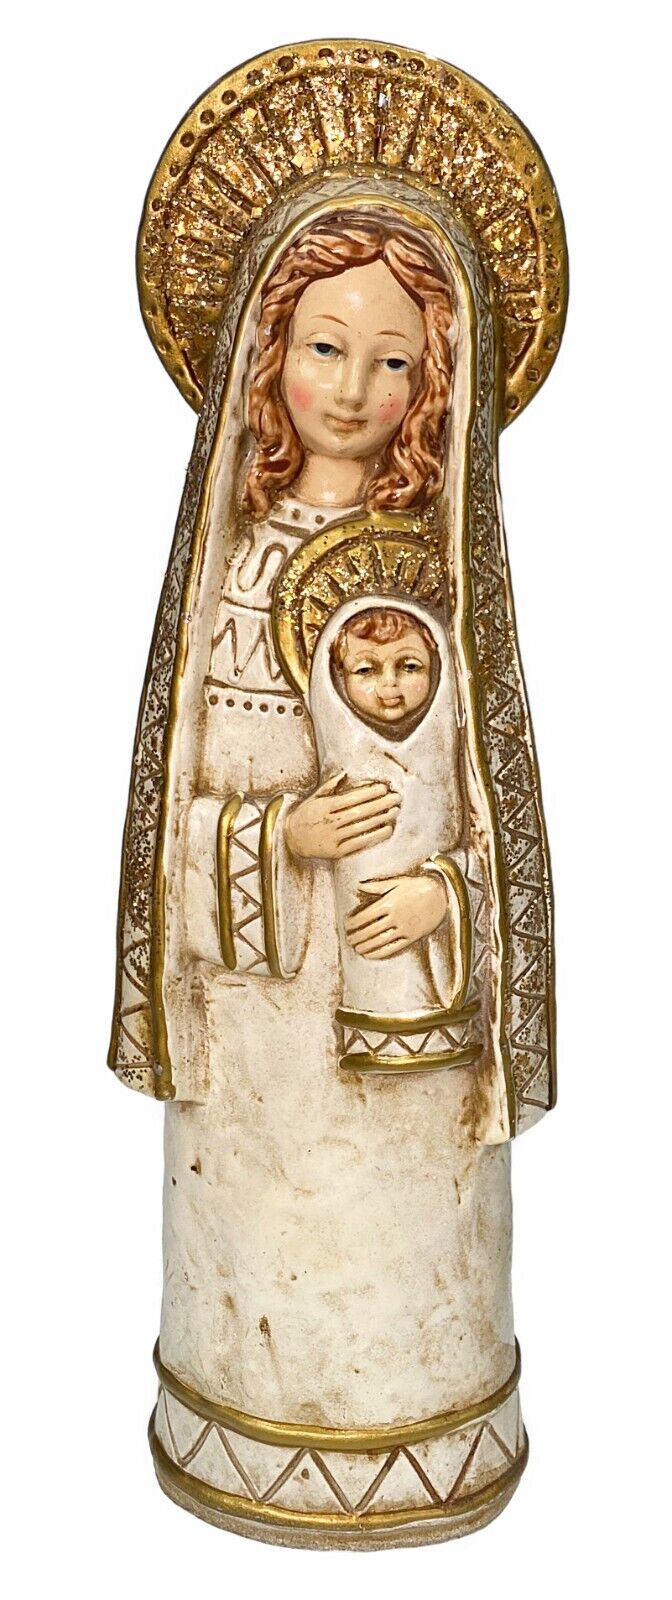 12.5” Mother Madonna and Child Baby Jesus Figurine Holy Religious Nativity